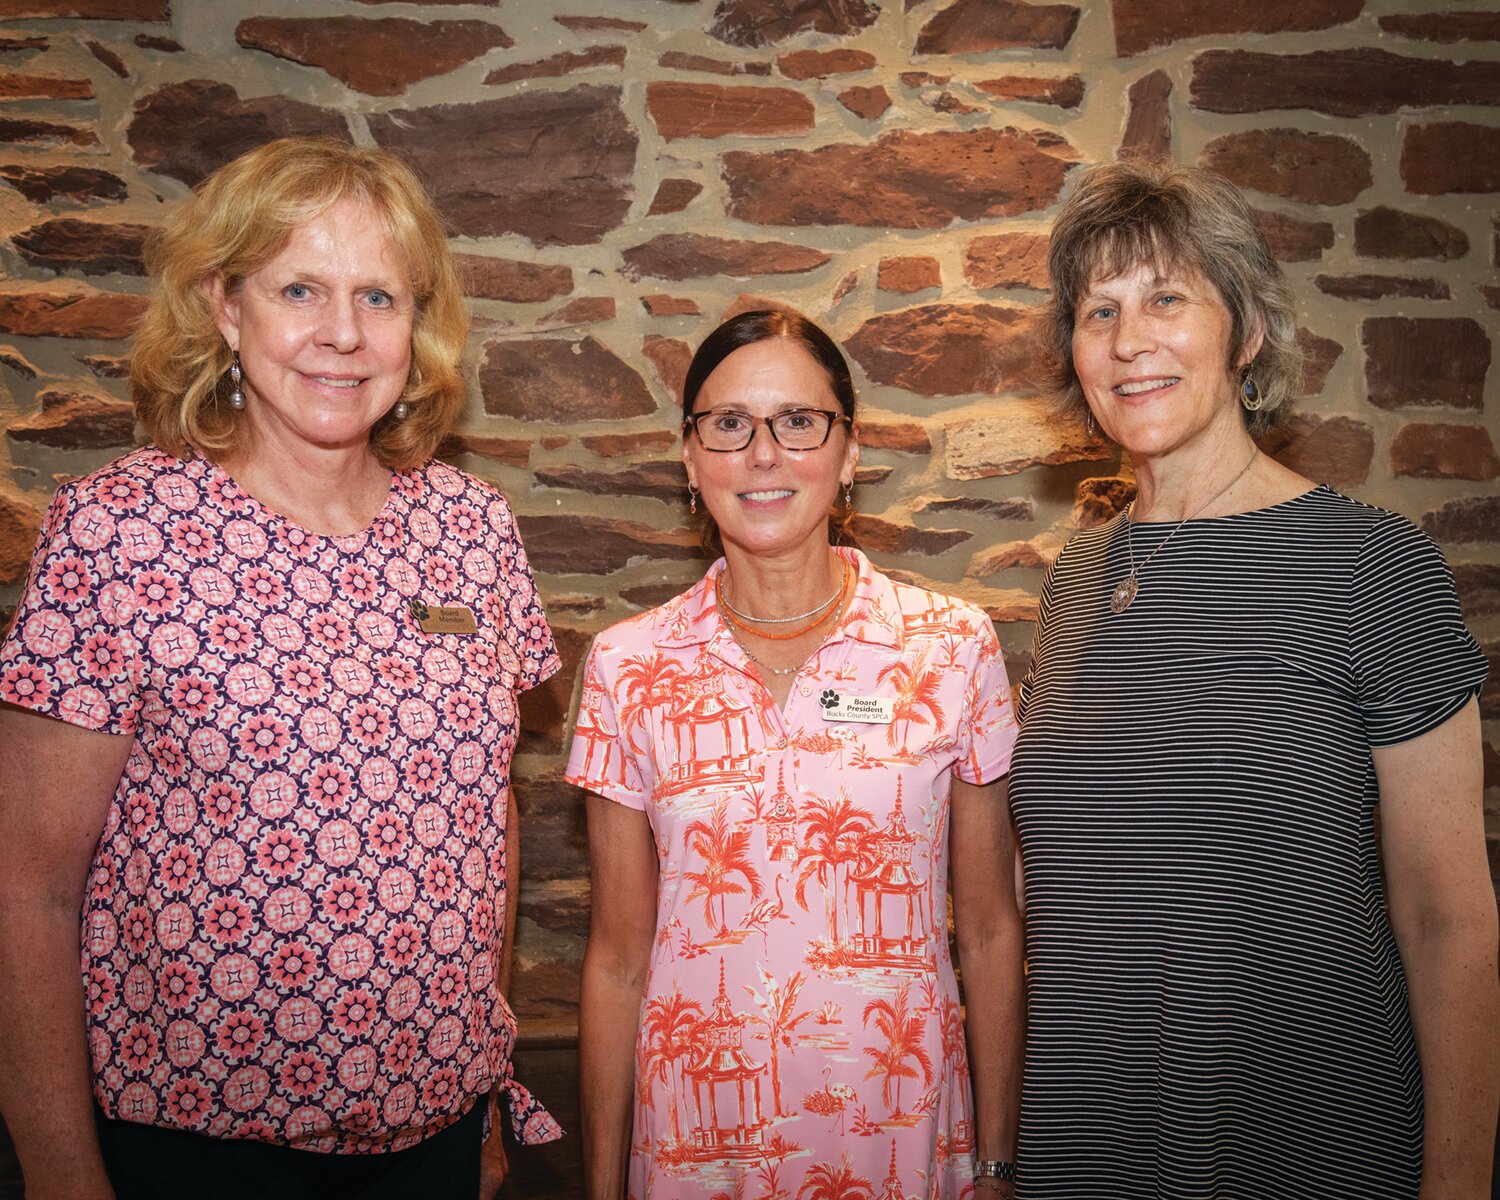 Bucks County SPCA Board members and event committee members Barb Gale, Maria Wirths and Dianne Magee.